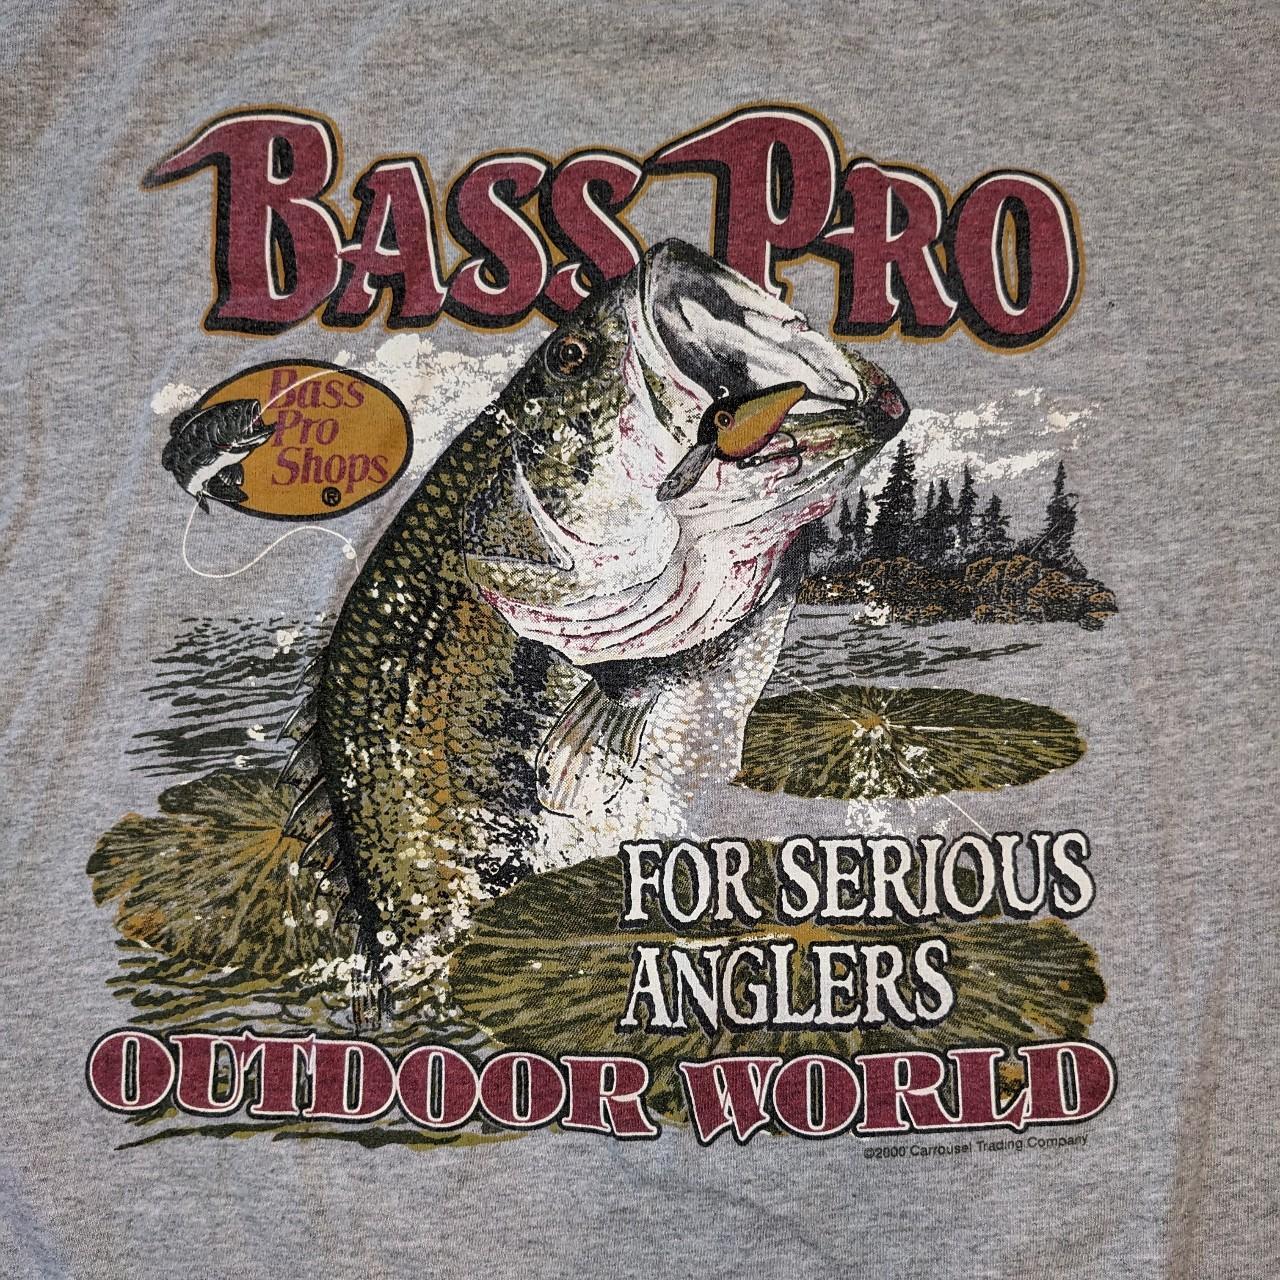 Vintage 2000s bass pro fishing tee Funny graphic - Depop